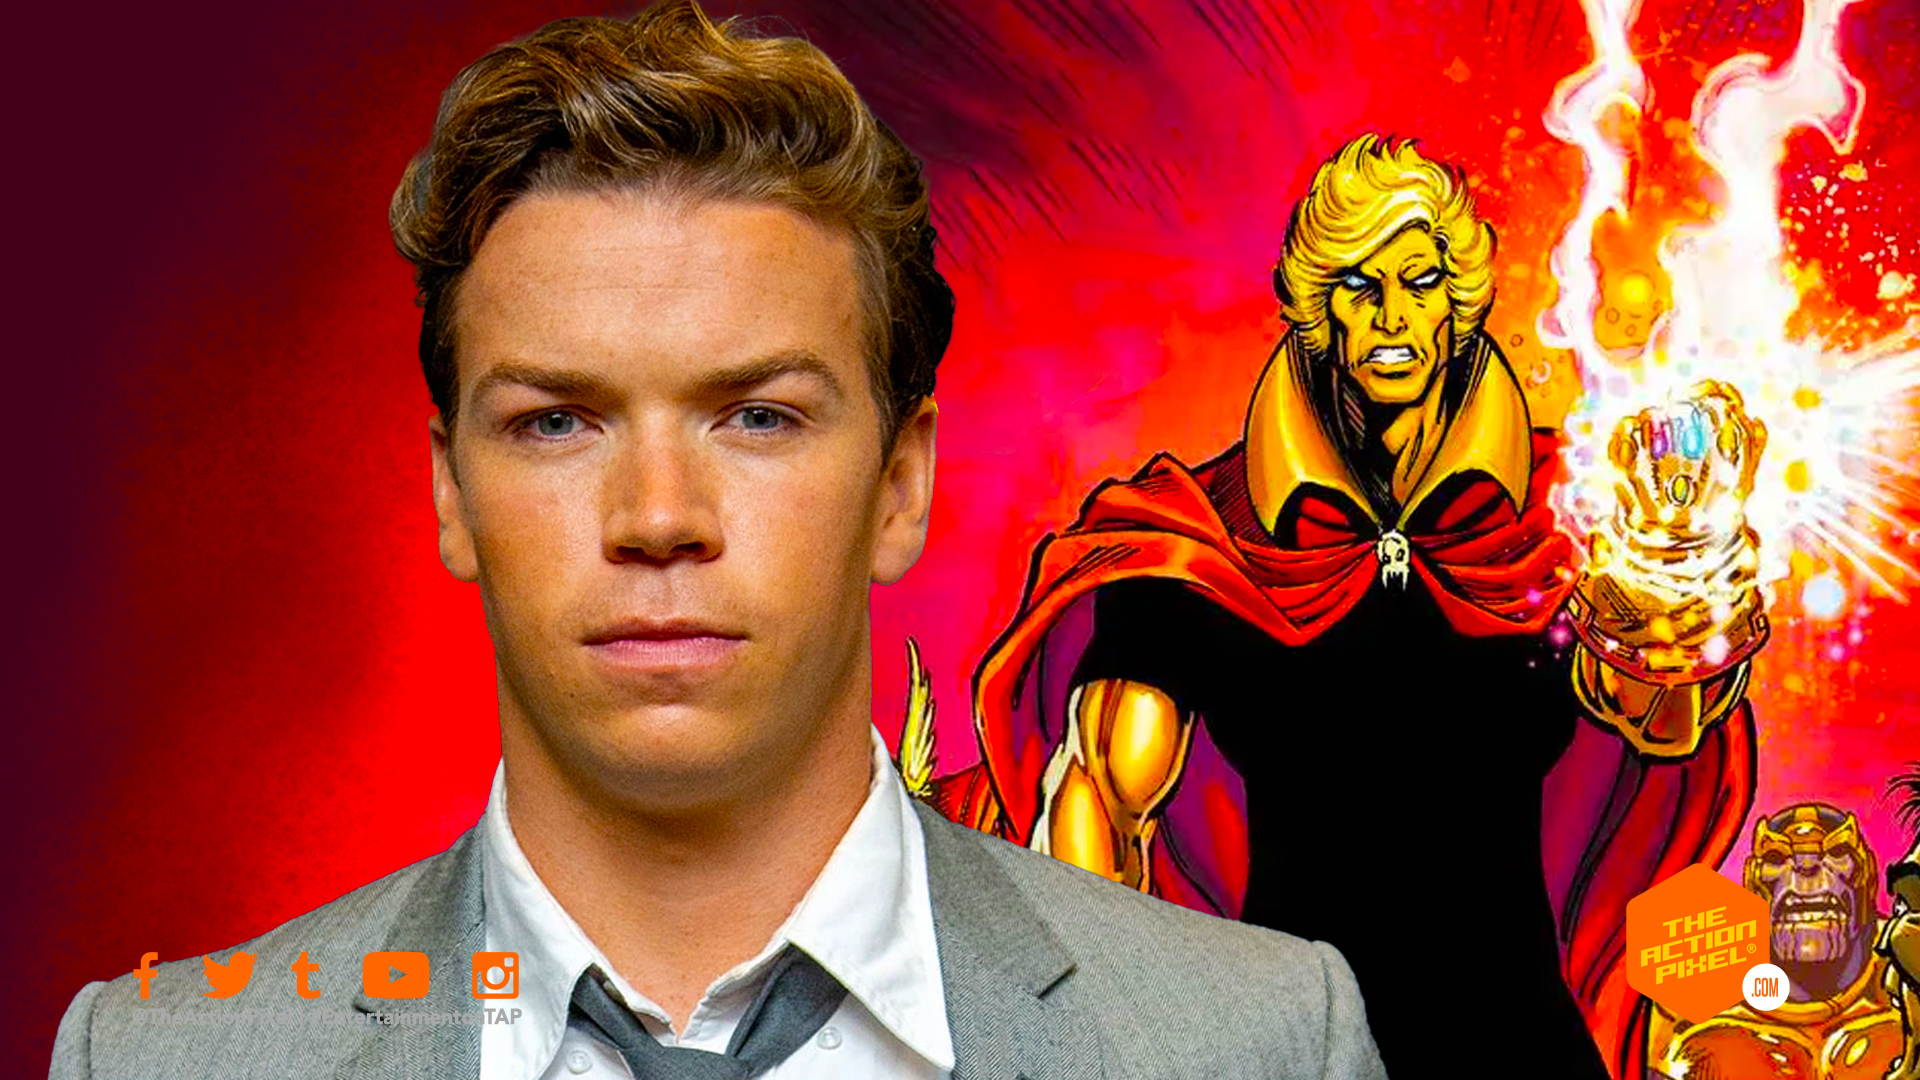 will poulter, adam warlock,gotg vol 3, gotg, guardians of the galaxy vol. 3, guardians of the galaxy, guardians of the galaxy vol 3, marvel studios, featured, entertainment on tap, the action pixel,